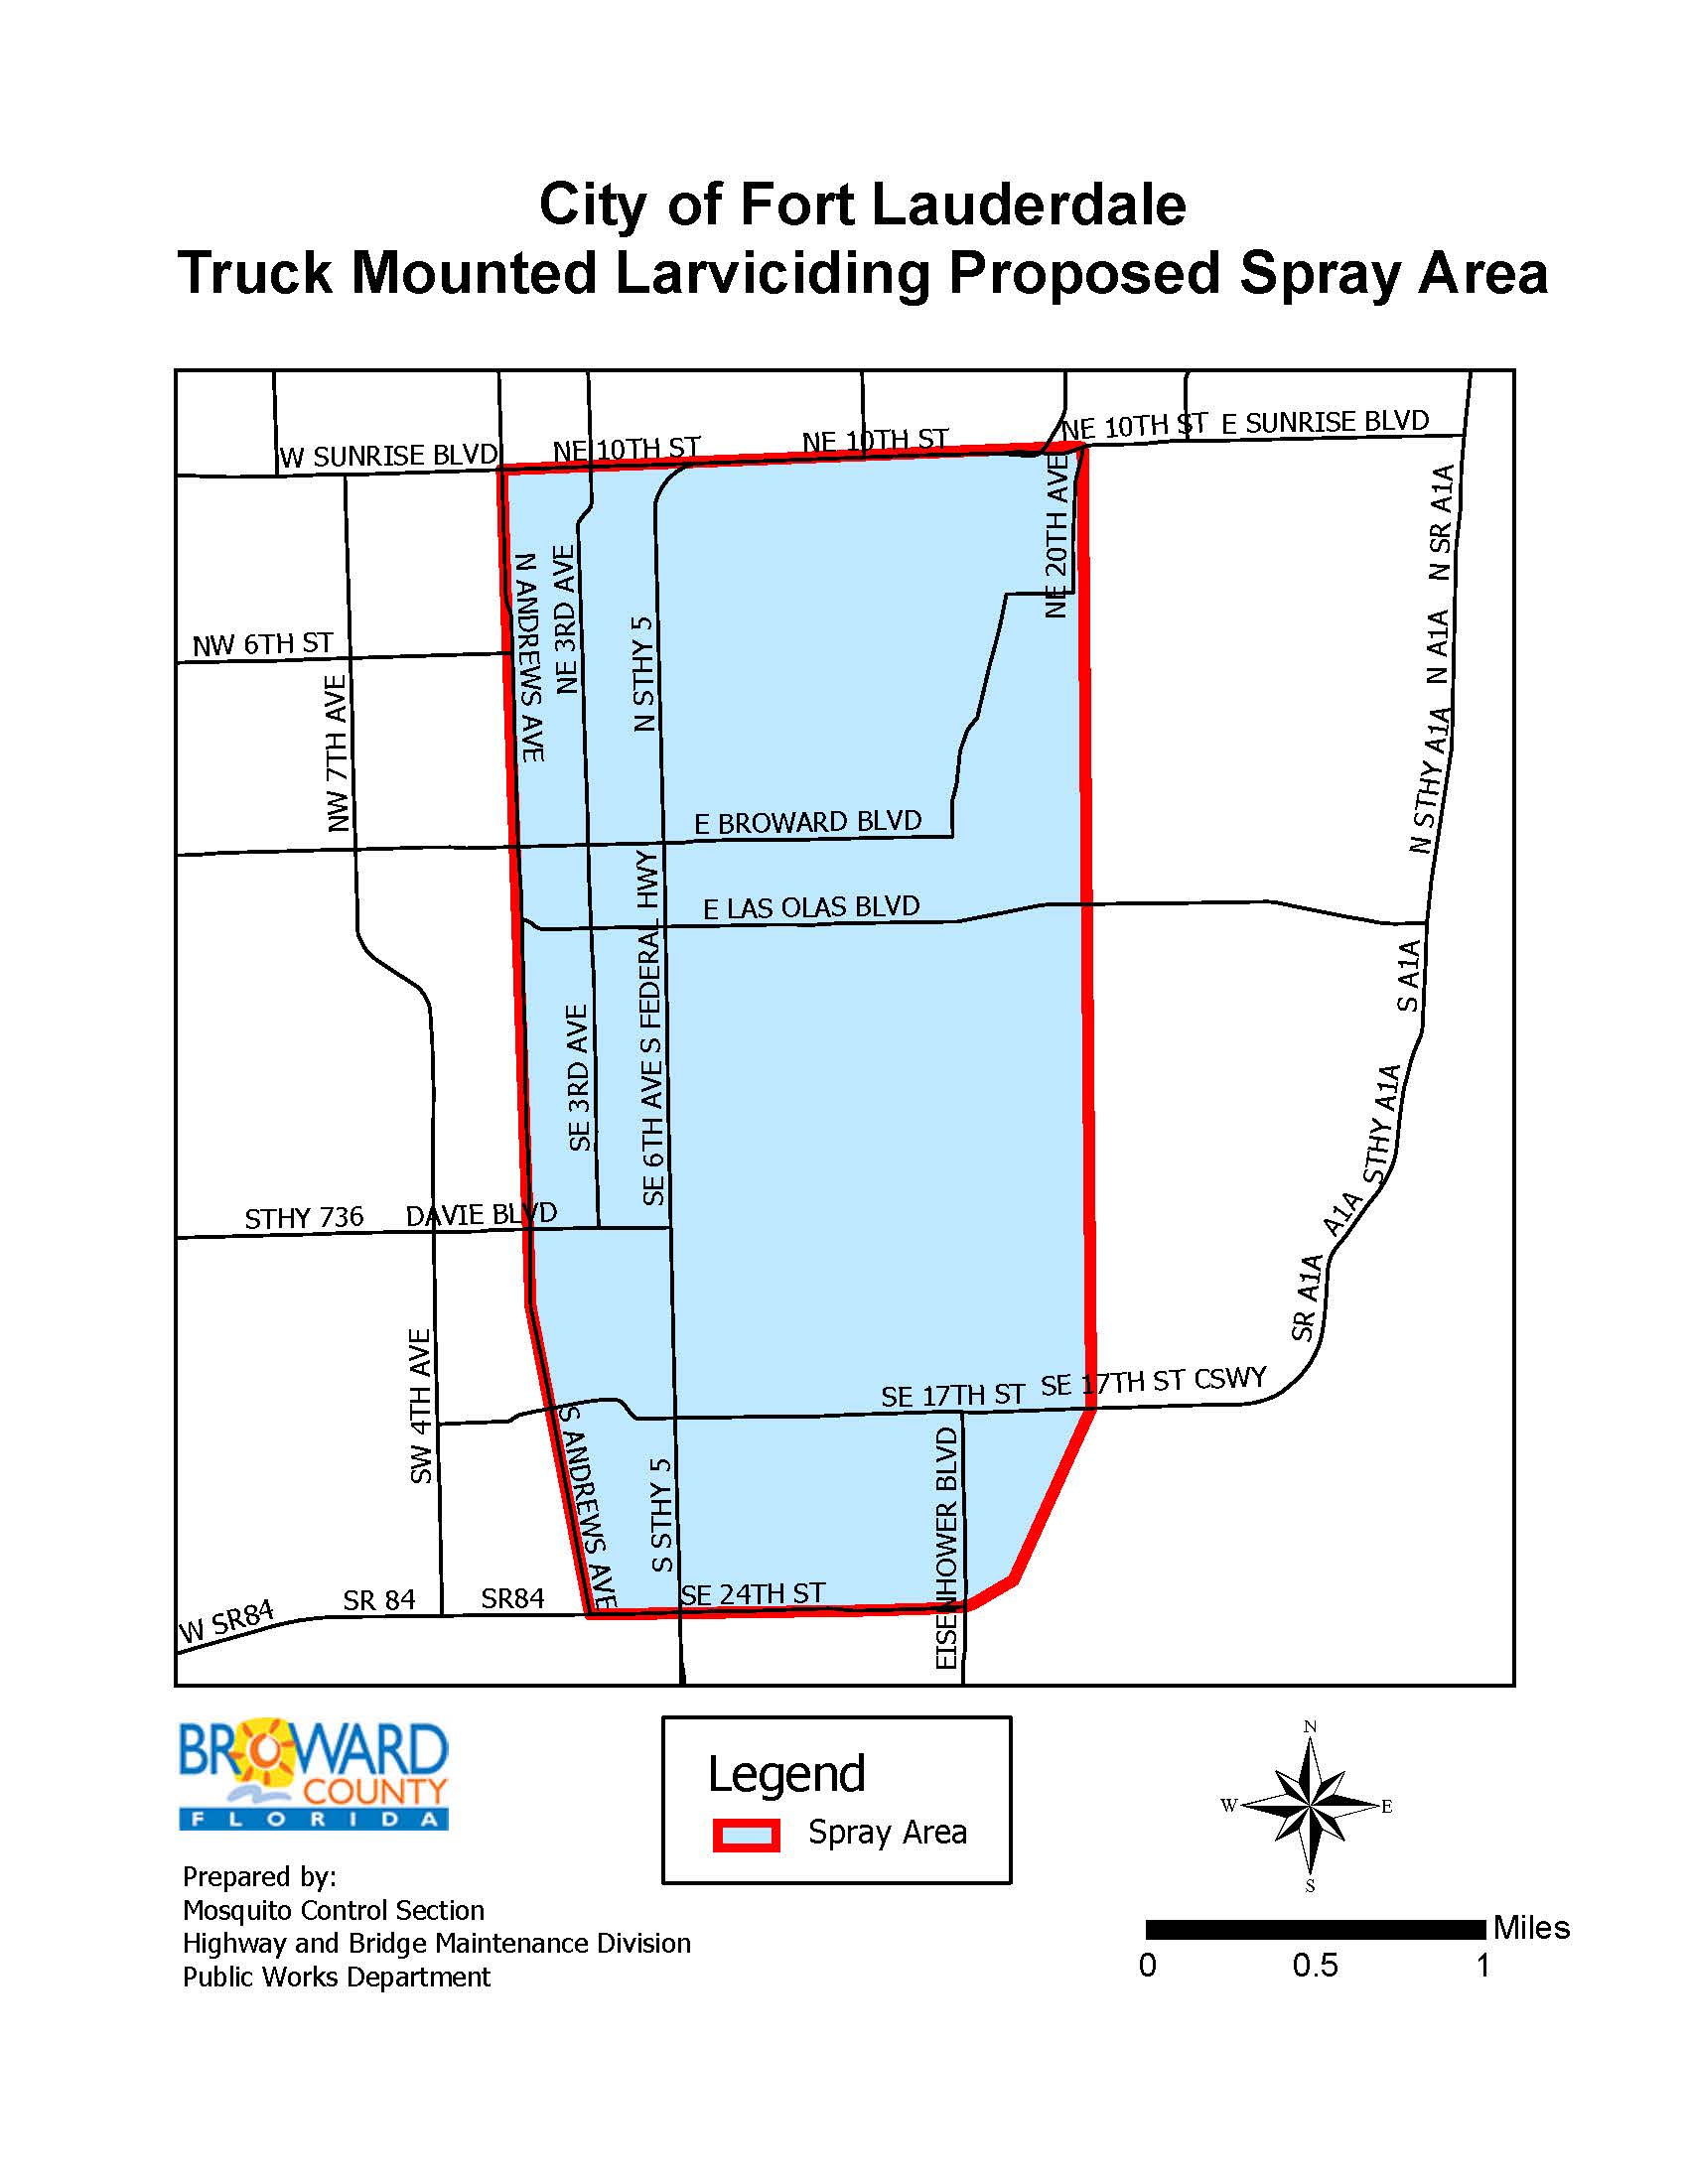 Fort Lauderdale Proposed Spray Area